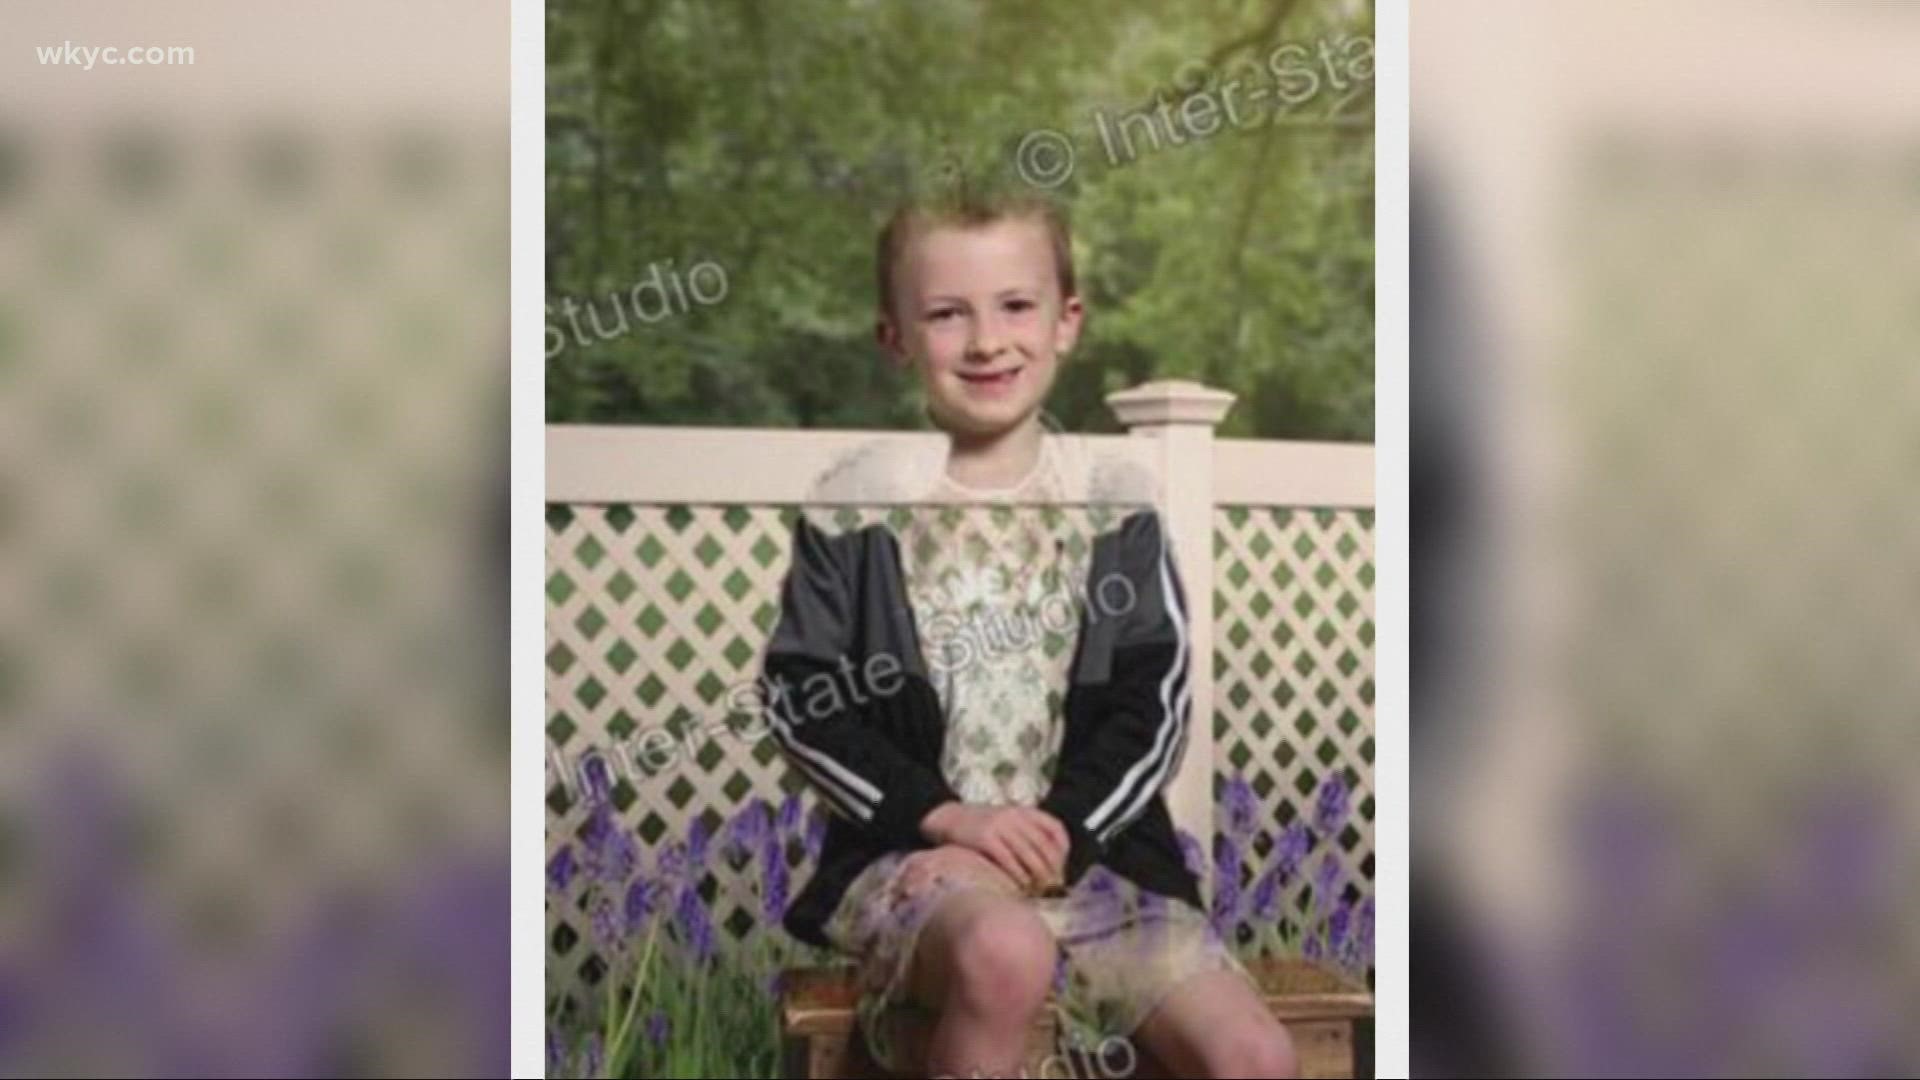 Parents were surprised to see their elementary students 'disappearing' into the background of their school pictures thanks to their St. Patrick's Day green attire.